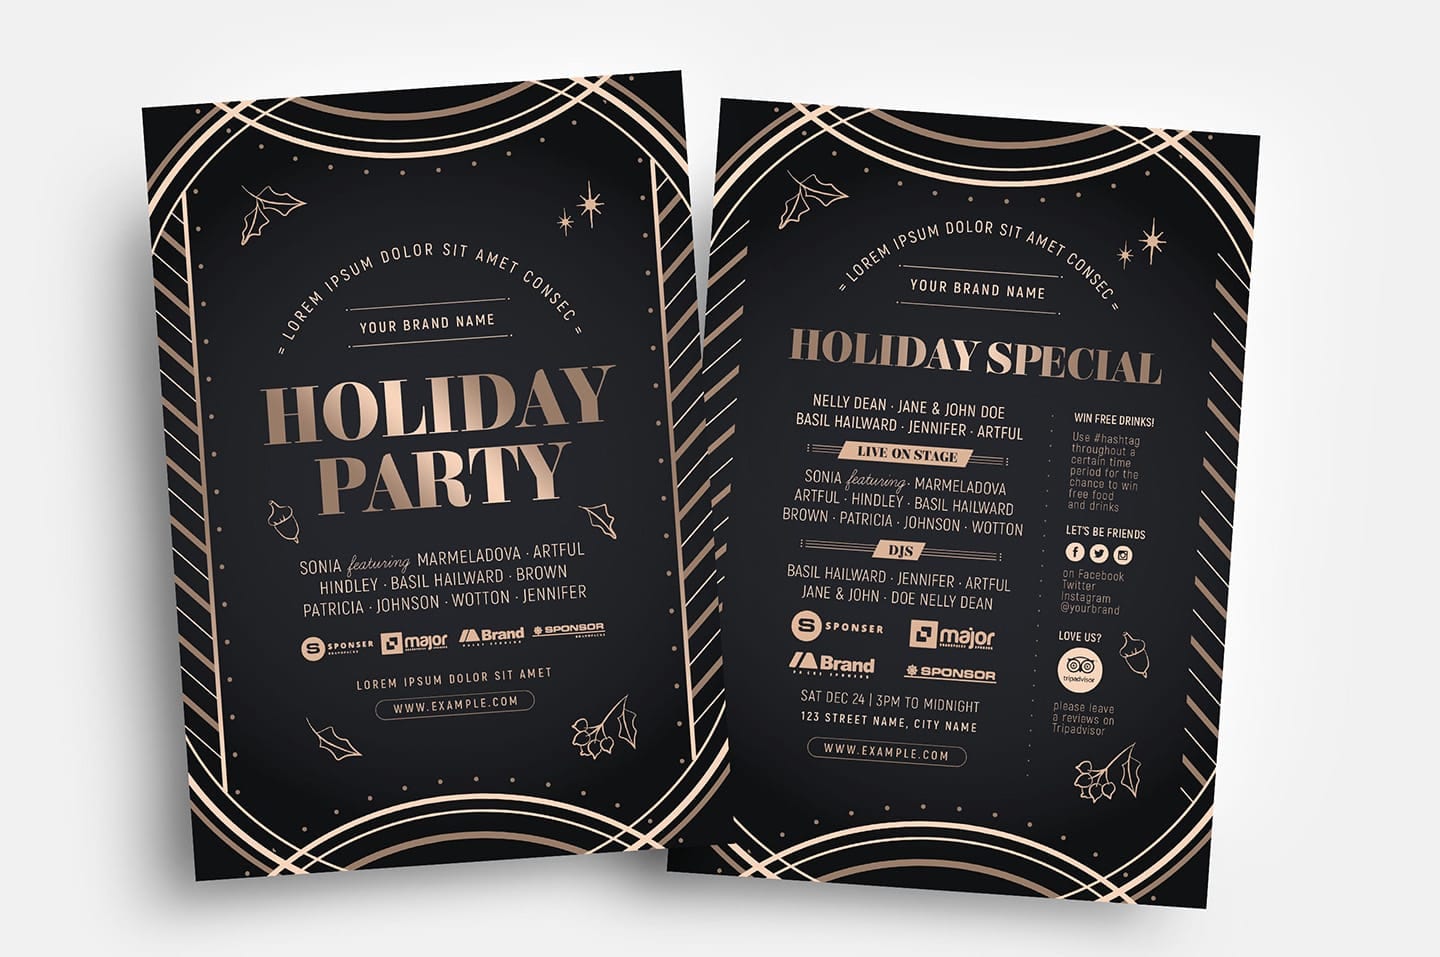 Holiday Party Flyer Template - PSD, Ai & Vector - BrandPacks With Regard To Free Holiday Party Flyer Templates